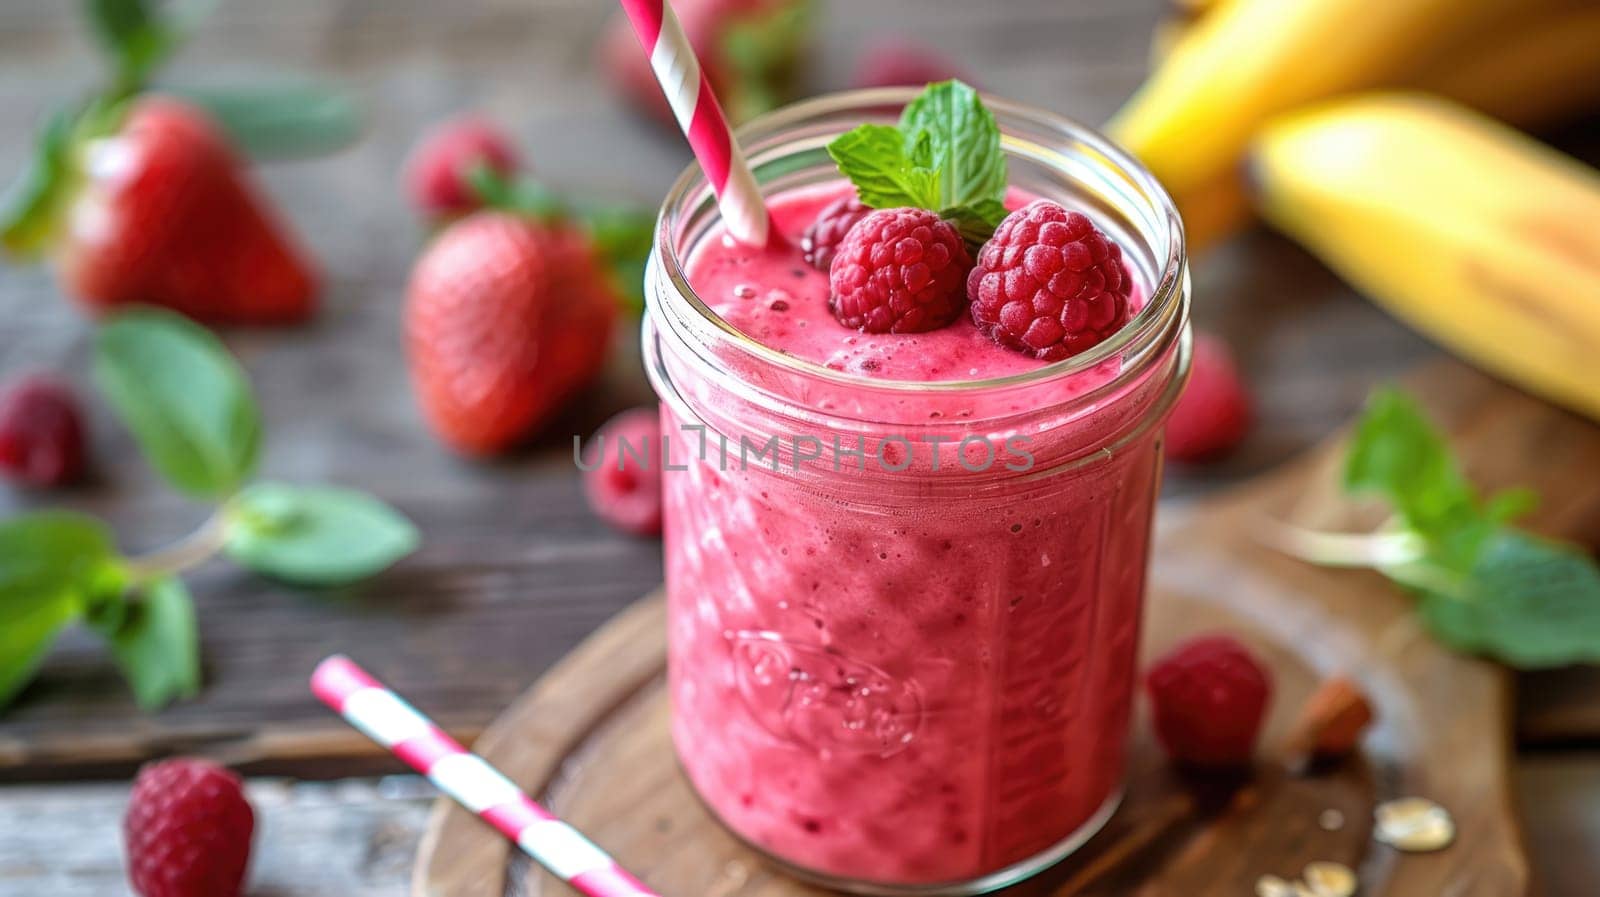 Fruit smoothie in a glass jar. Summer vibe by natali_brill